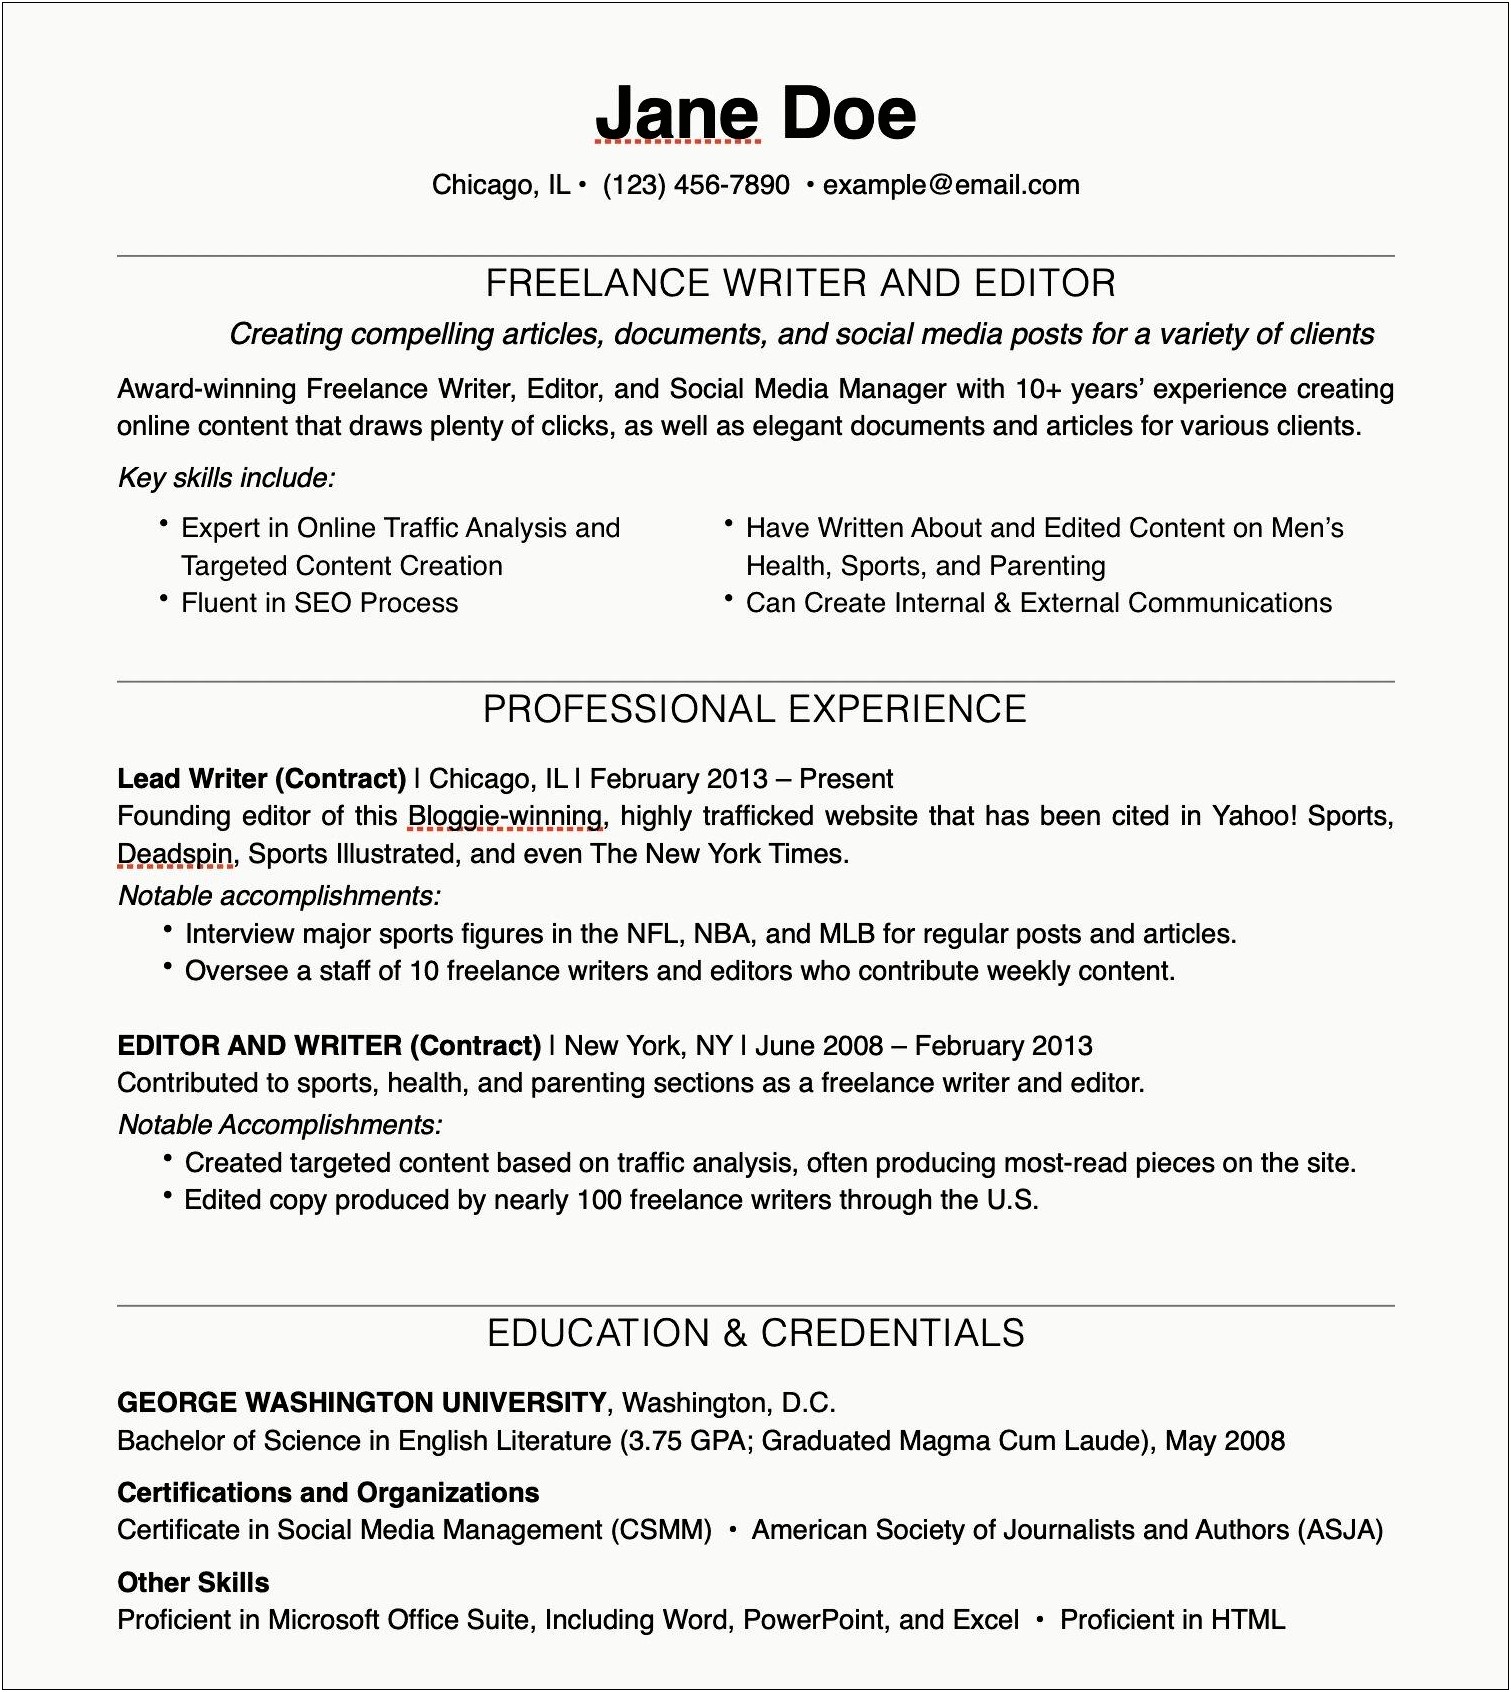 Putting Current Freelance Work On A Resume